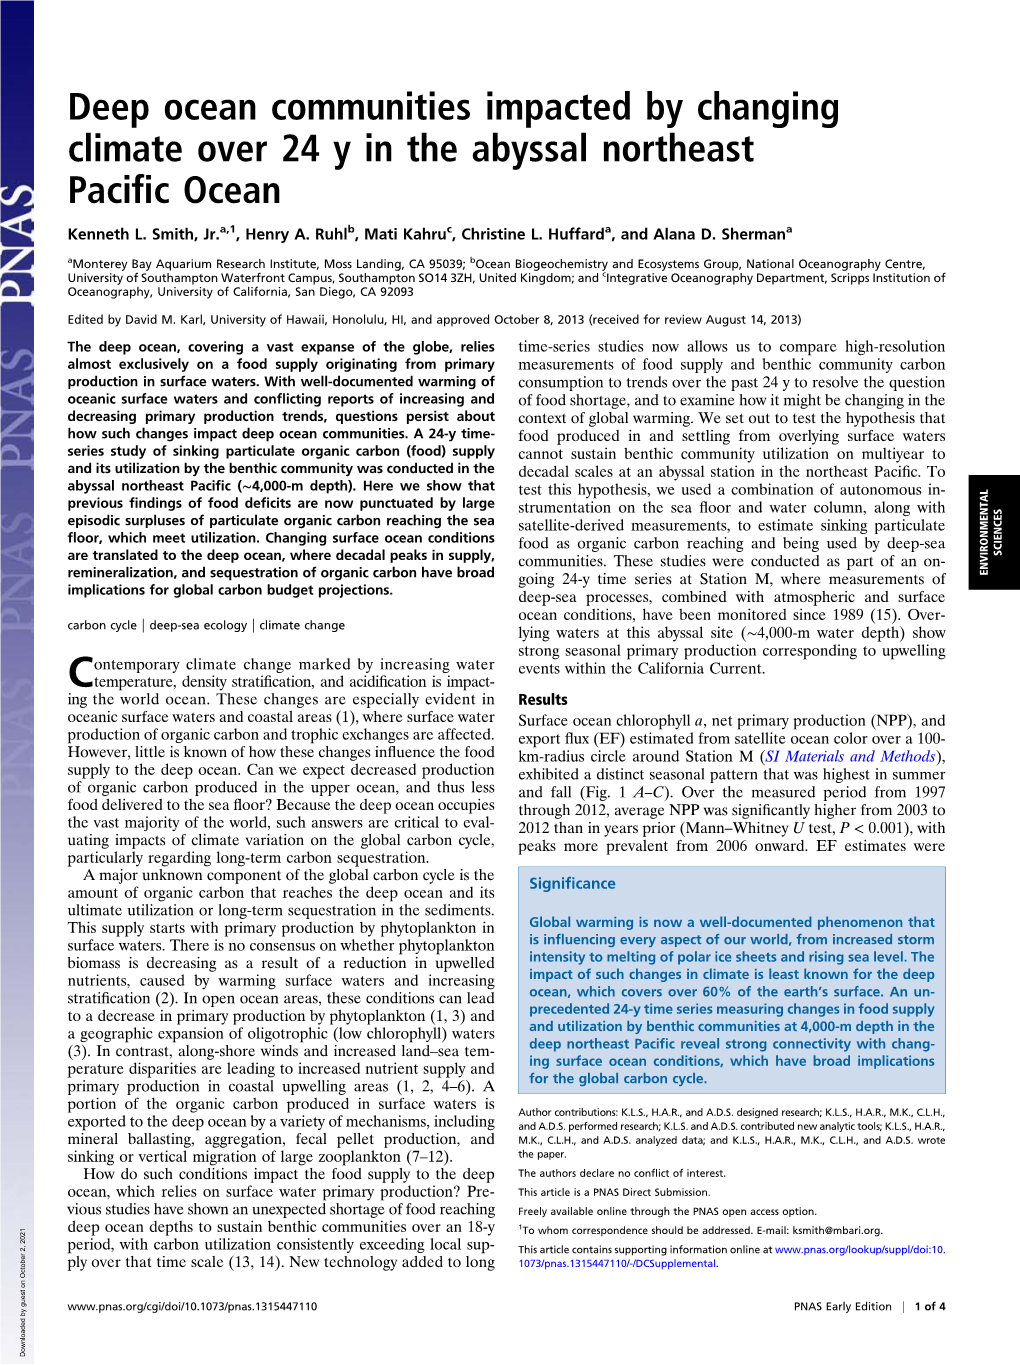 Deep Ocean Communities Impacted by Changing Climate Over 24 Y in the Abyssal Northeast Paciﬁc Ocean